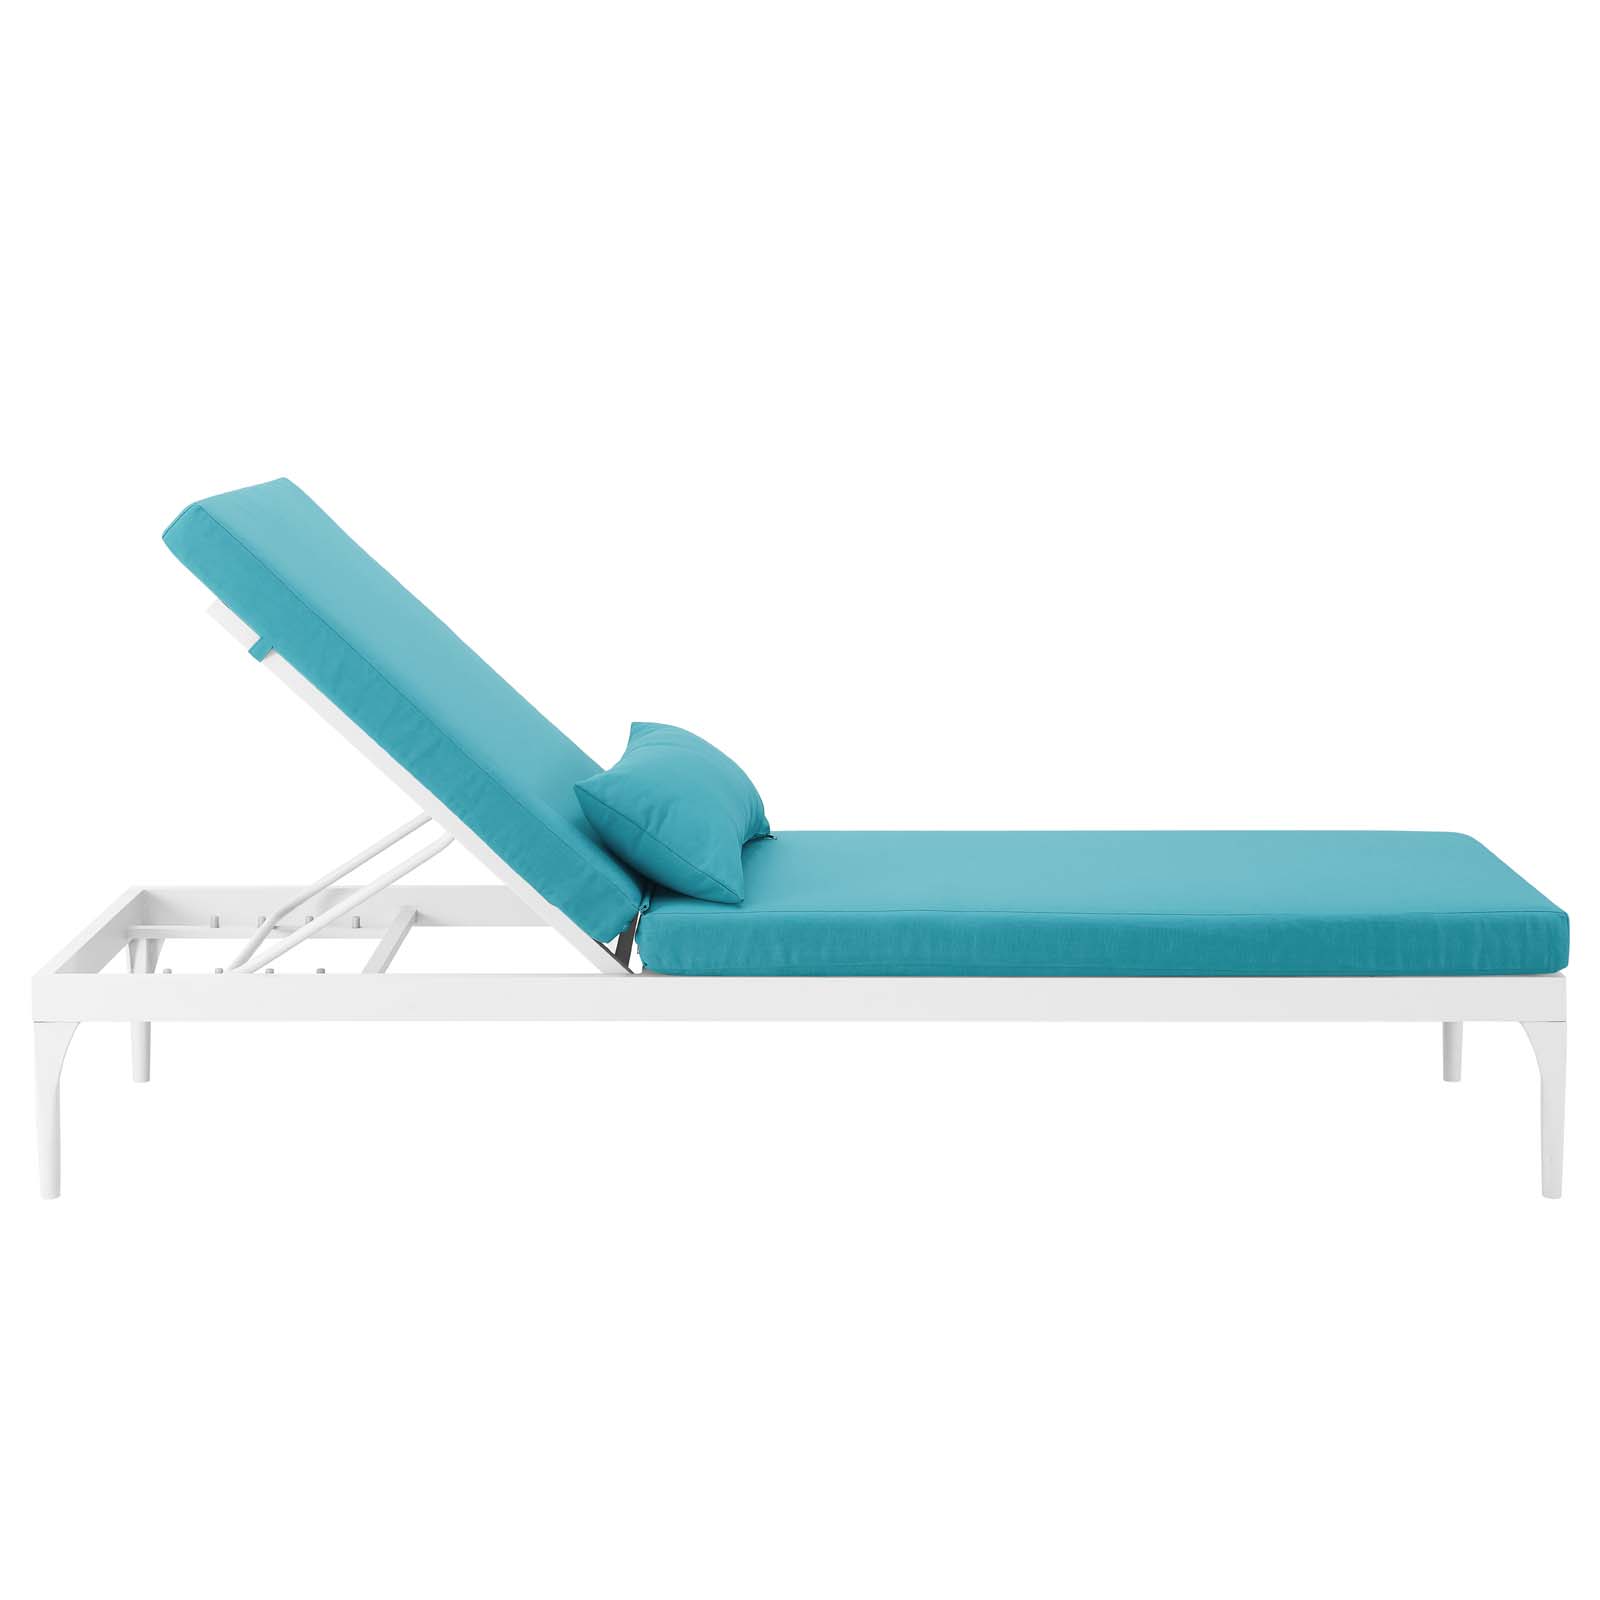 Modern Contemporary Urban Design Outdoor Patio Balcony Garden Furniture Lounge Chair Chaise, Fabric Metal Steel, White Blue - image 3 of 7